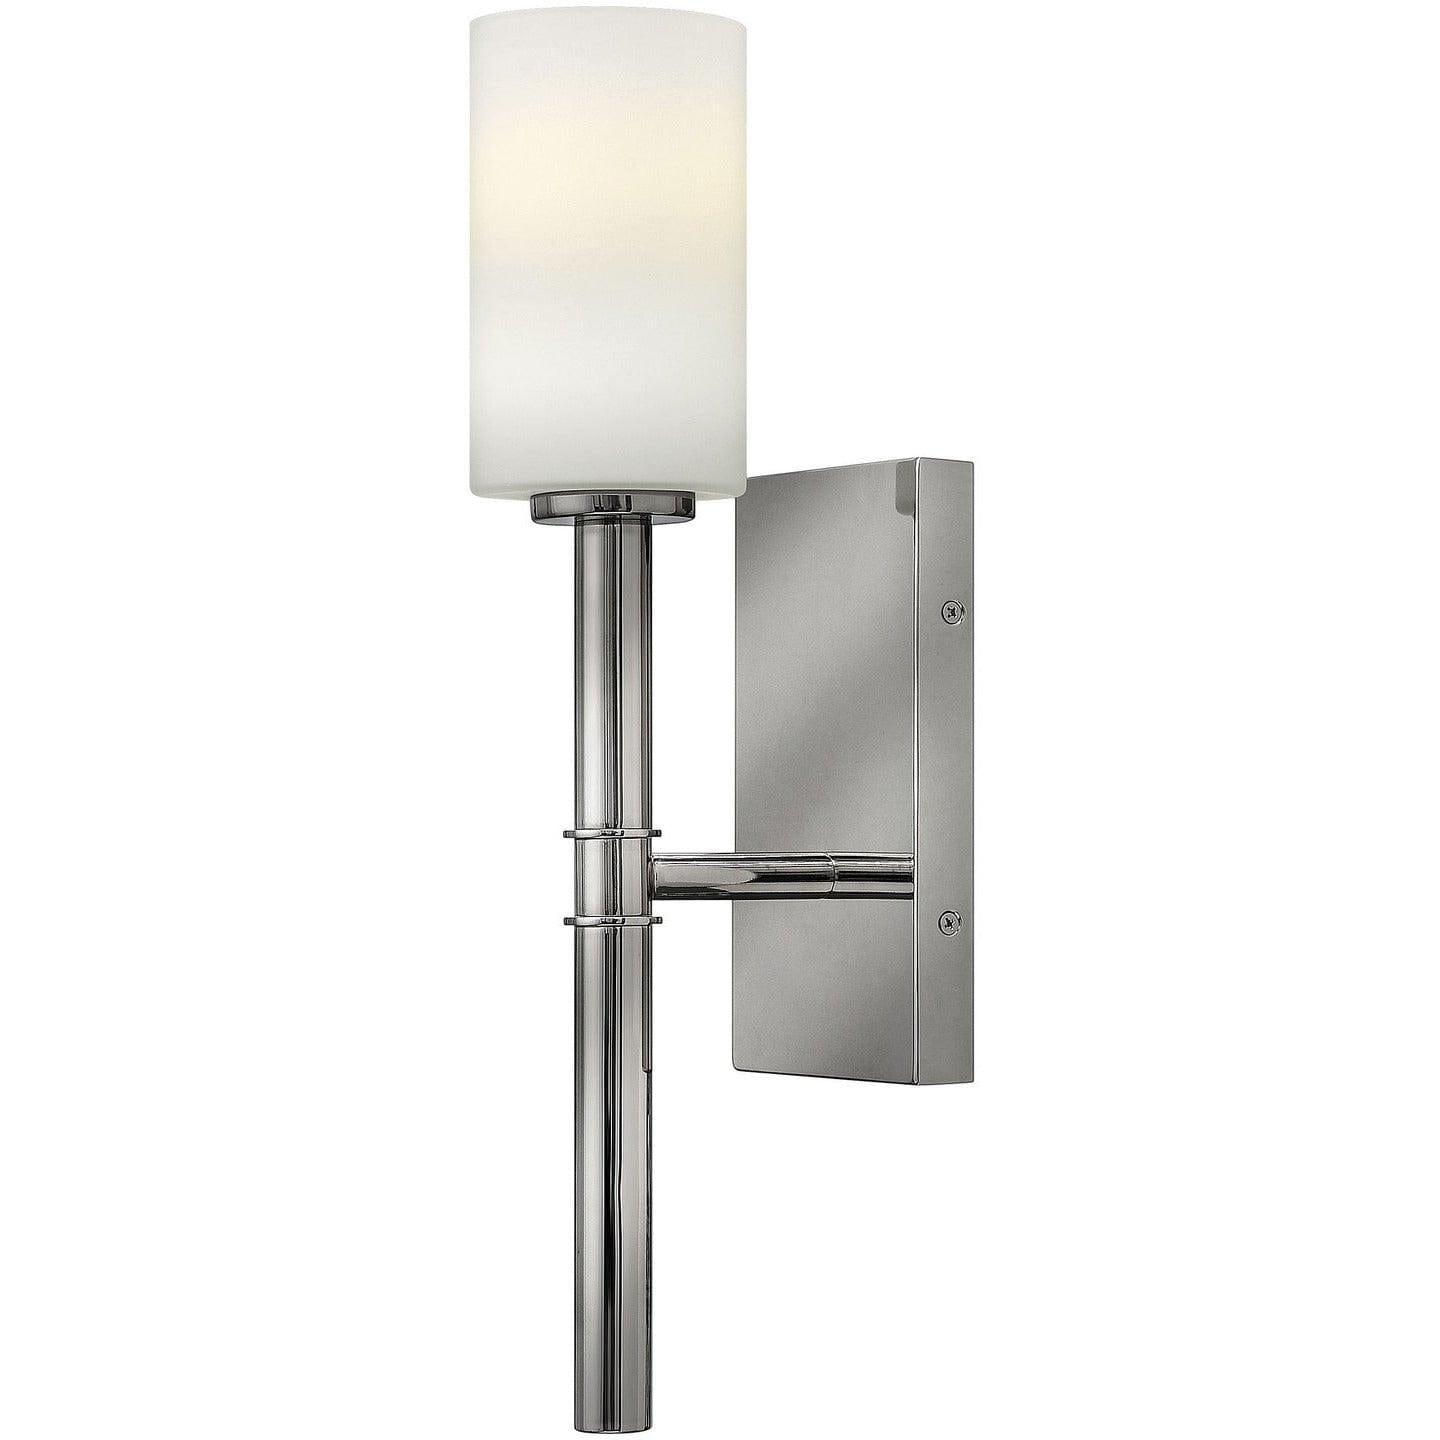 Hinkley Lighting - Margeaux 18-Inch Wall Sconce - 3580PN | Montreal Lighting & Hardware